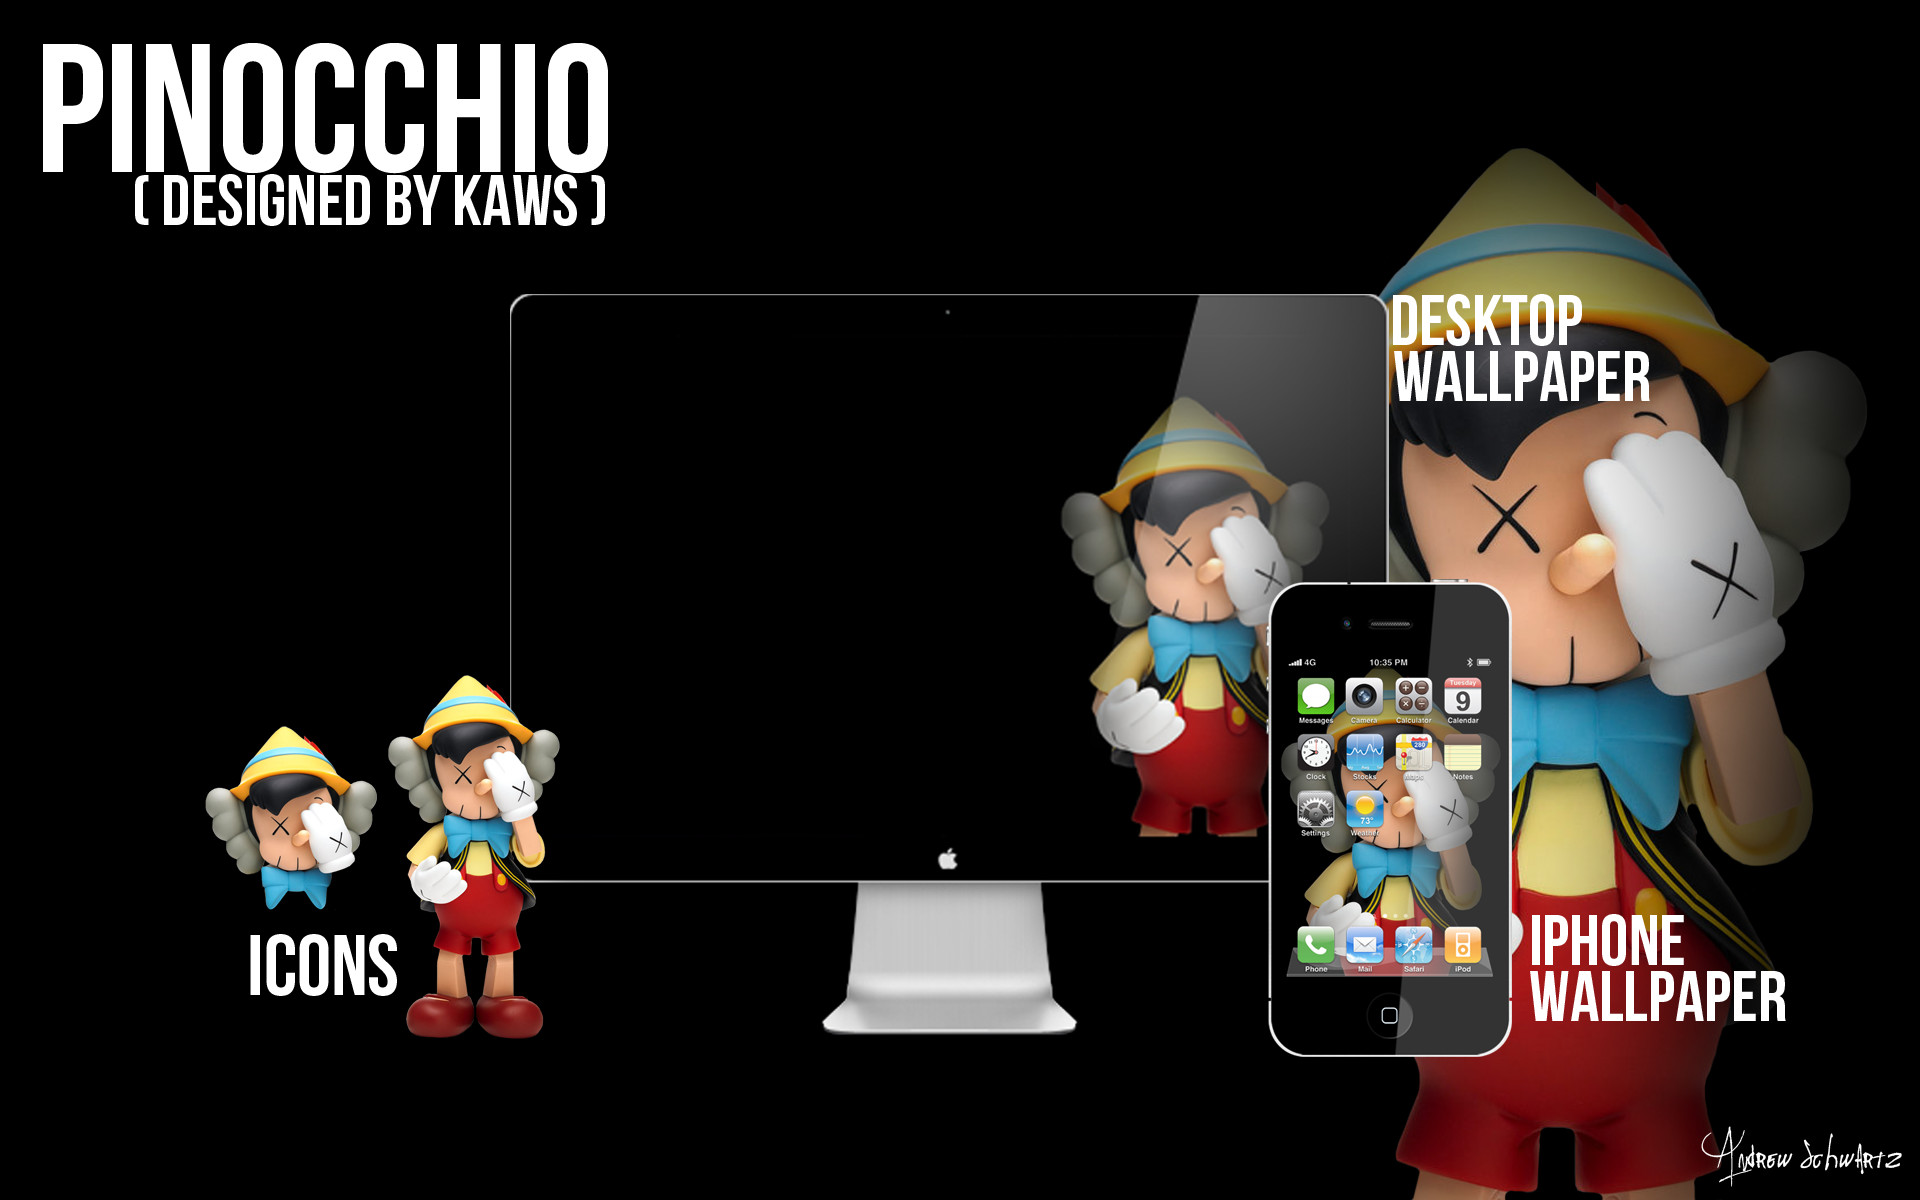 1920x1200 KAWS Pinocchio Wallpaper and Icons by acvschwartz KAWS Pinocchio Wallpaper  and Icons by acvschwartz